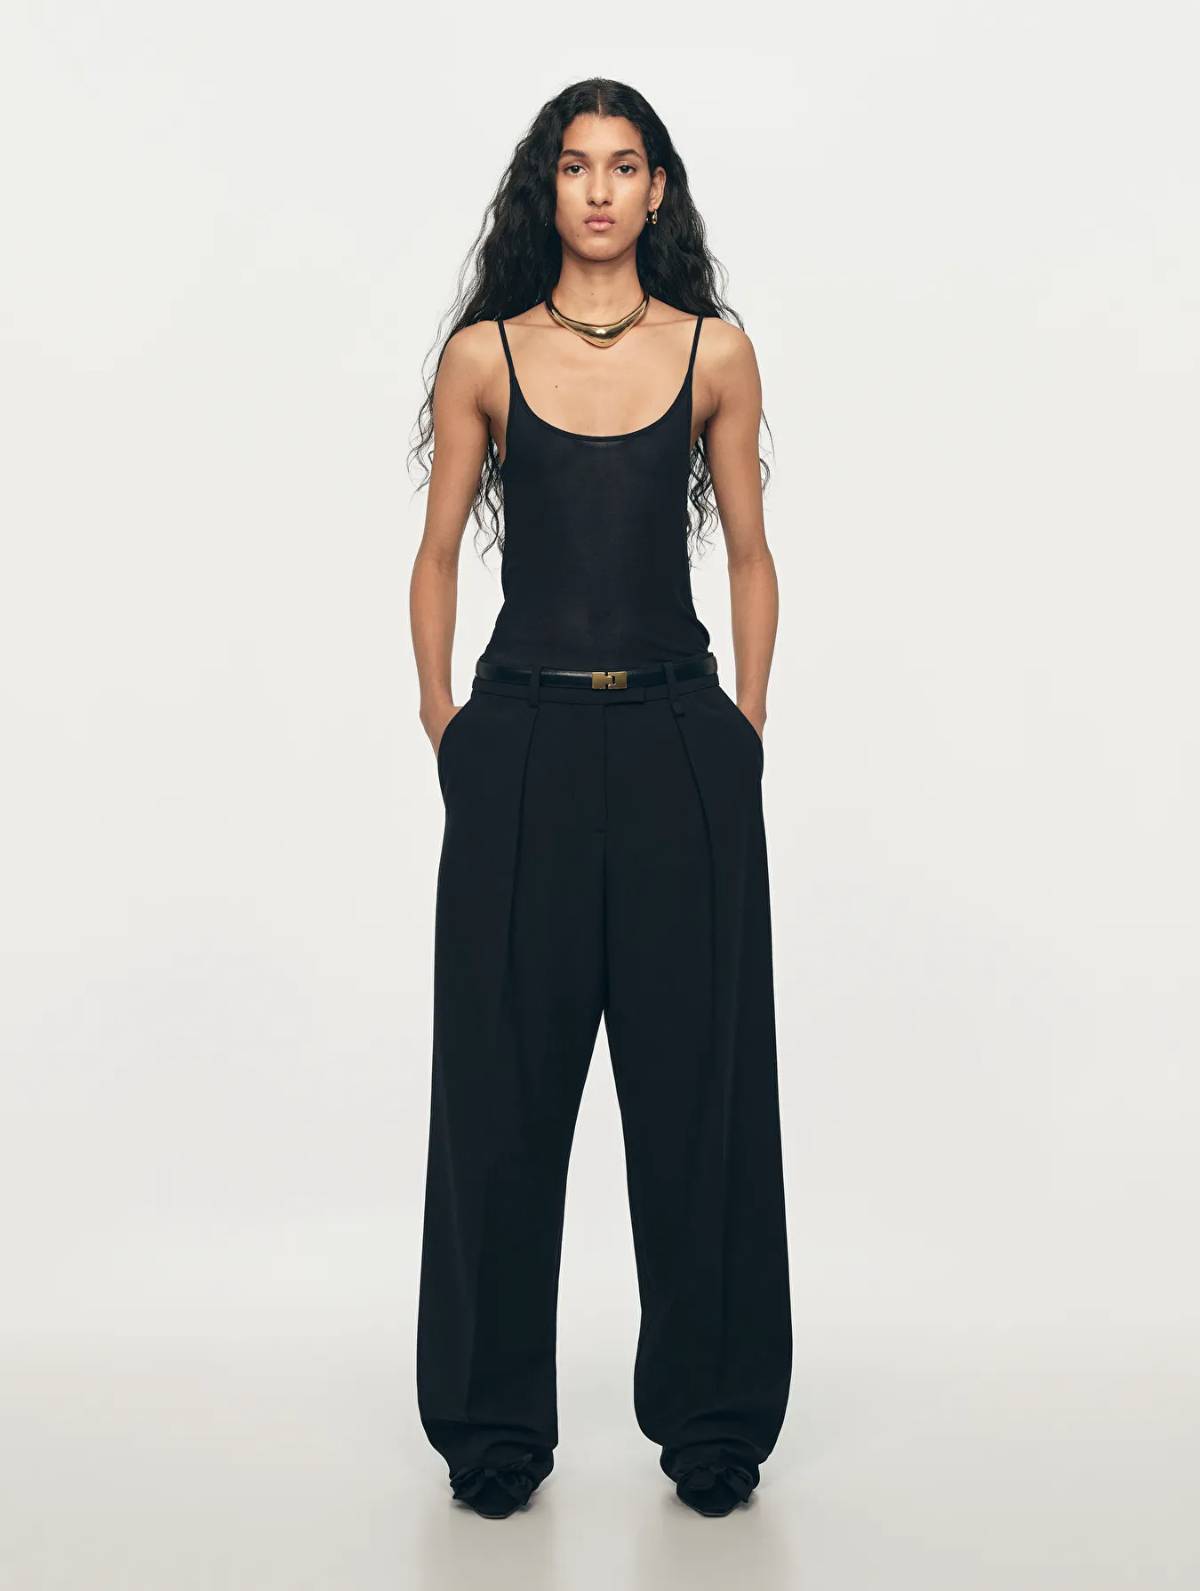 Arket Holiday Essentials Black Silk Tank Top, Wool Blend Twill Trousers, Square-Toe Ankle Boots